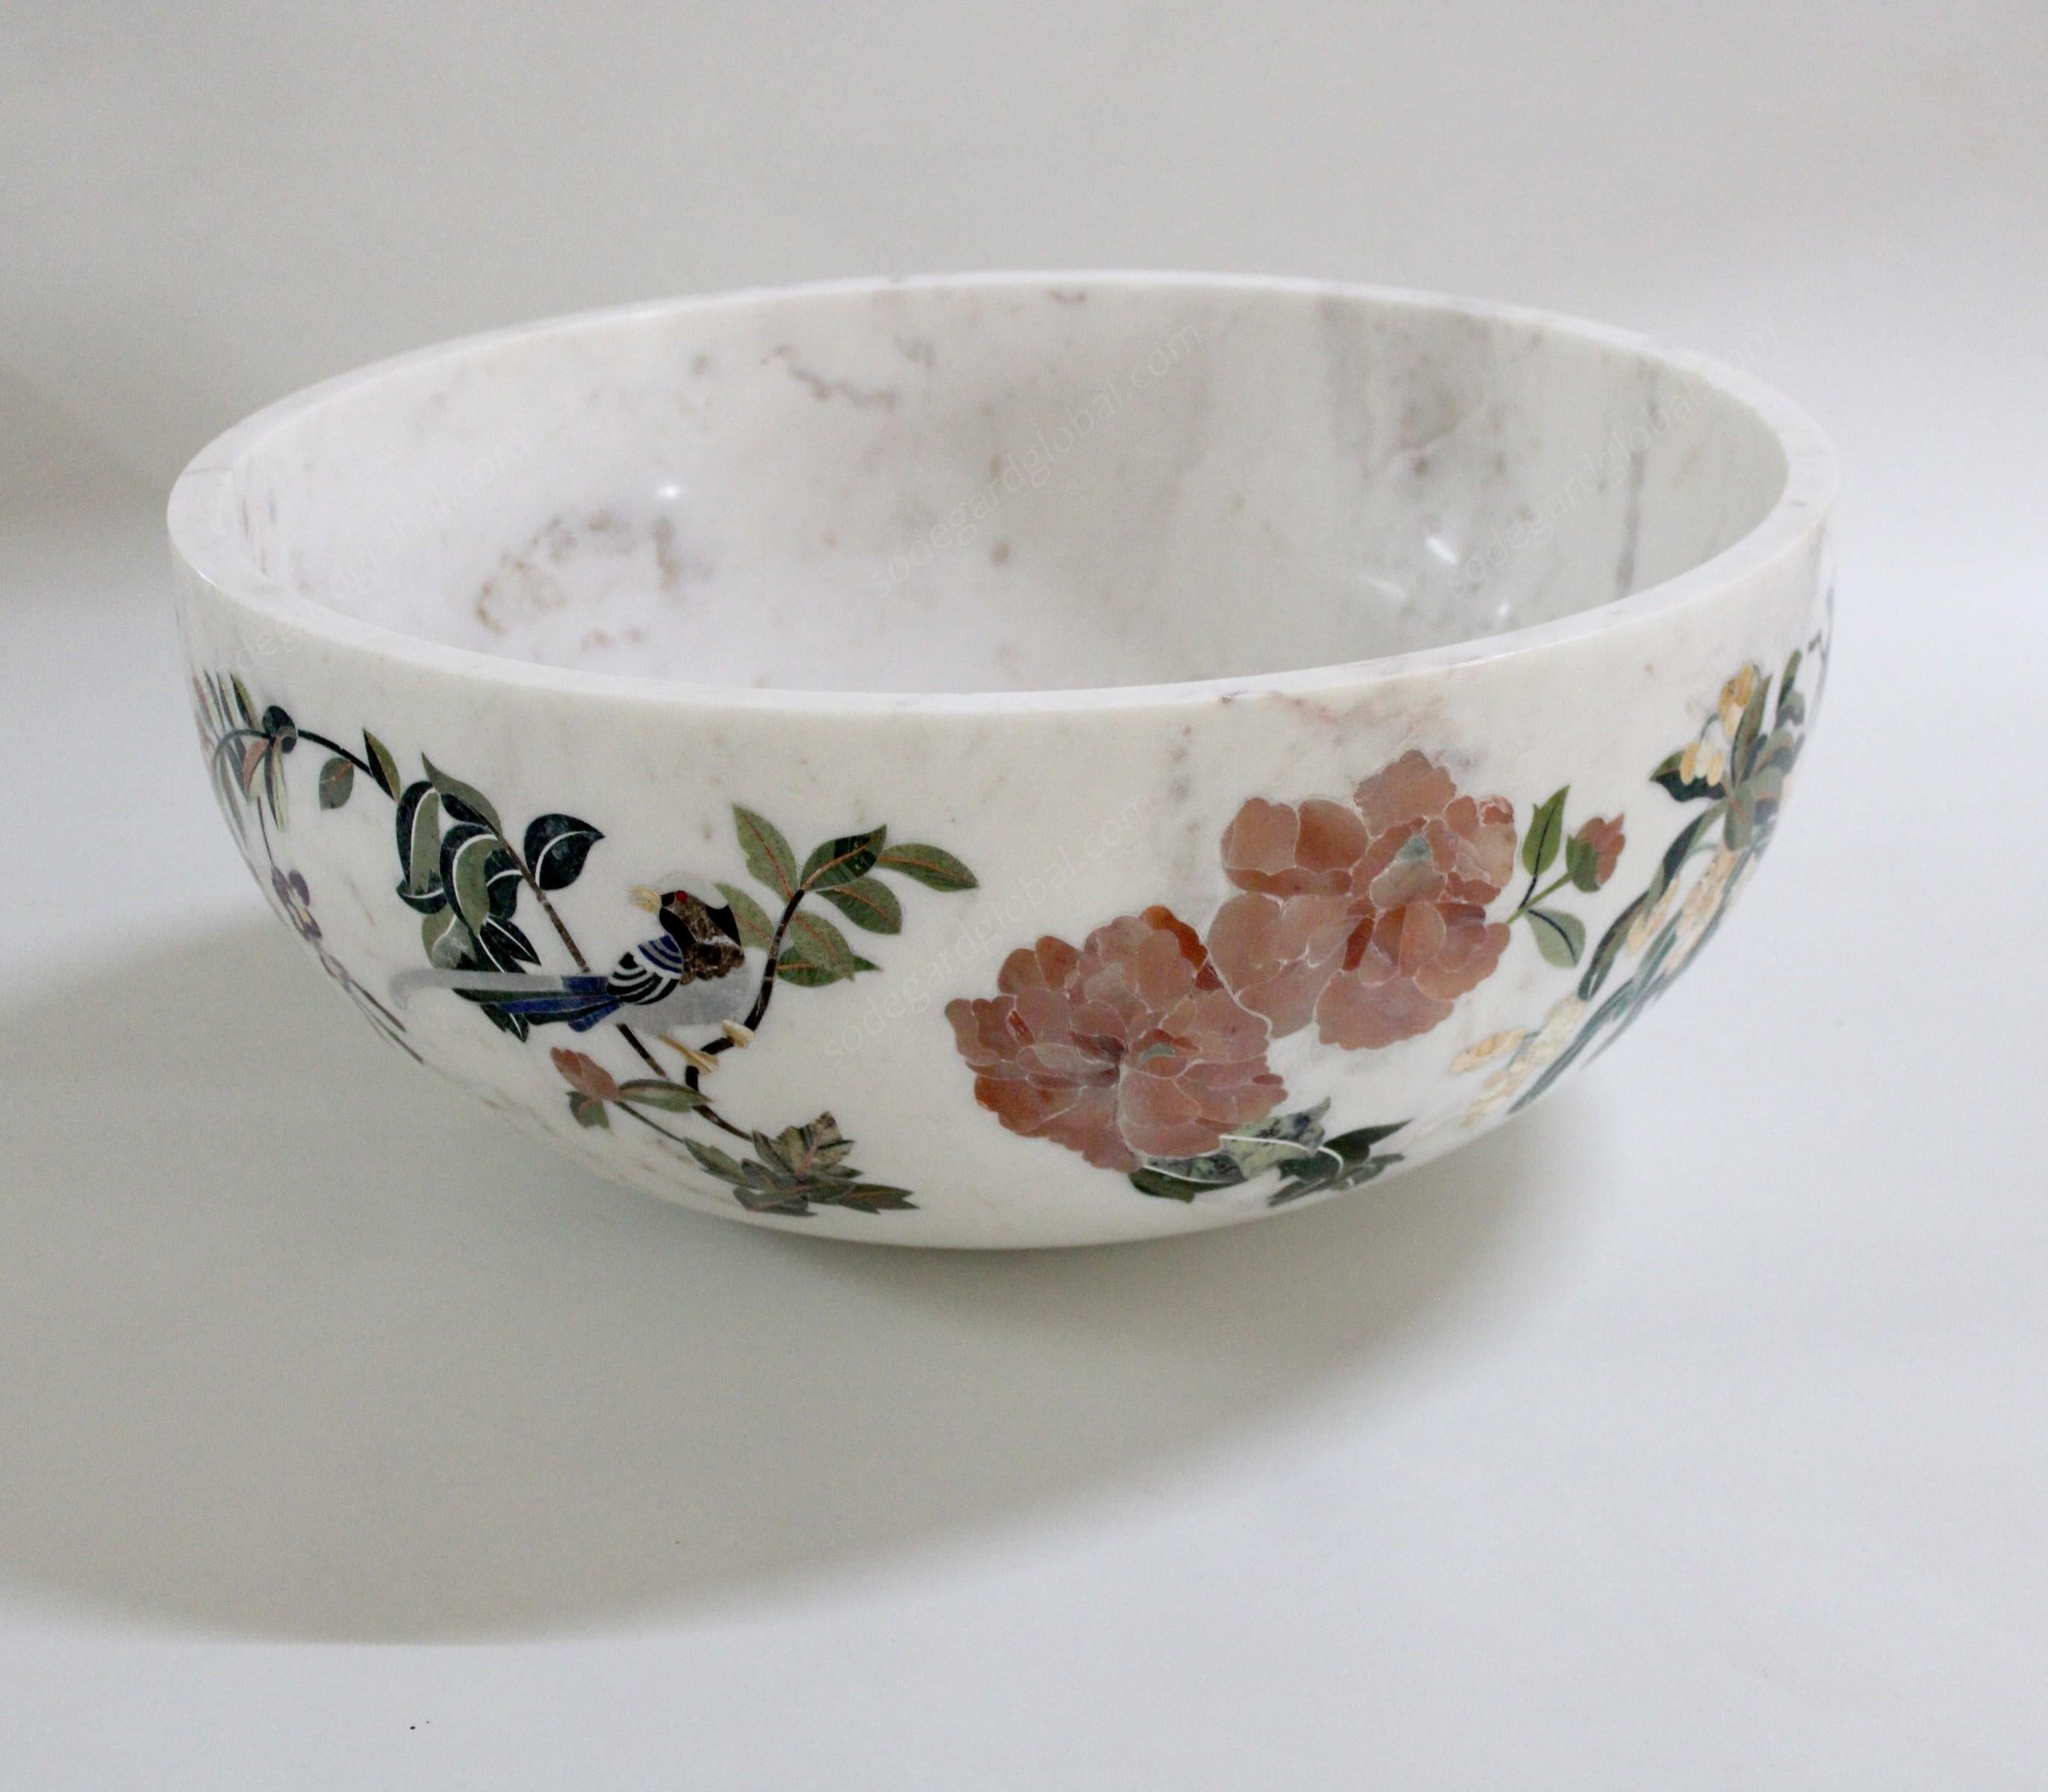 Handmade Ornamenti Bowl Inlay in White Marble by Stephanie Odegard For Sale 6